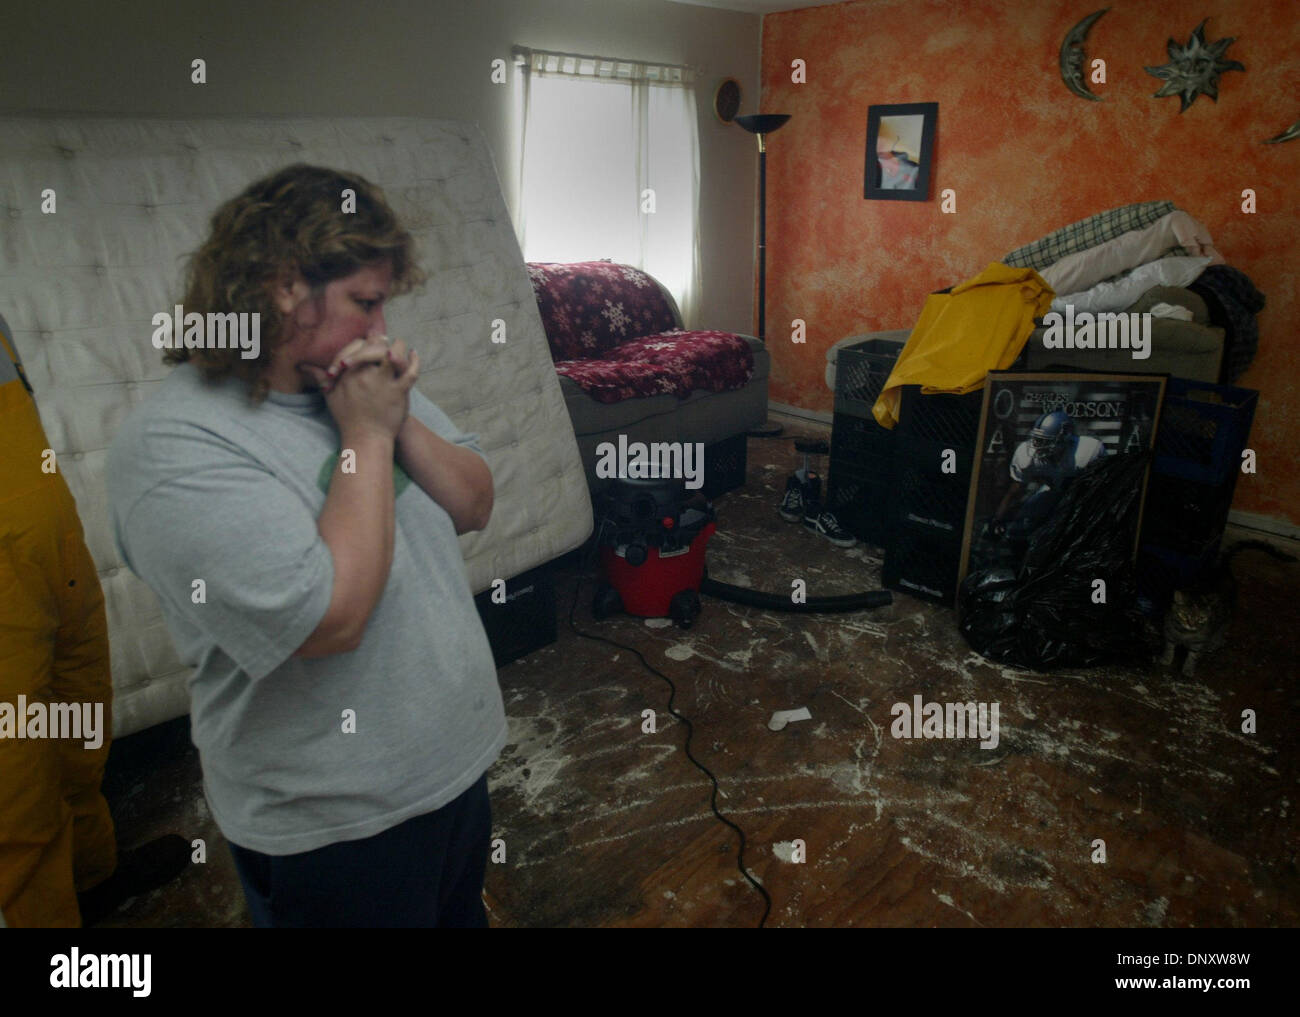 Jan 02, 2006; Napa, CA, USA; After several days of torrential rain and high winds, roads in Northern California reach saturation point and extensive flooding occurs throughout the region. Michelle Juarez stand inside her flooded rented home off lincoln Ave. in Napa.  Mandatory Credit: Photo by Bryan Patrick/Sacramento Bee/ZUMA Press. (©) Copyright 2006 by Sacramento Bee Stock Photo